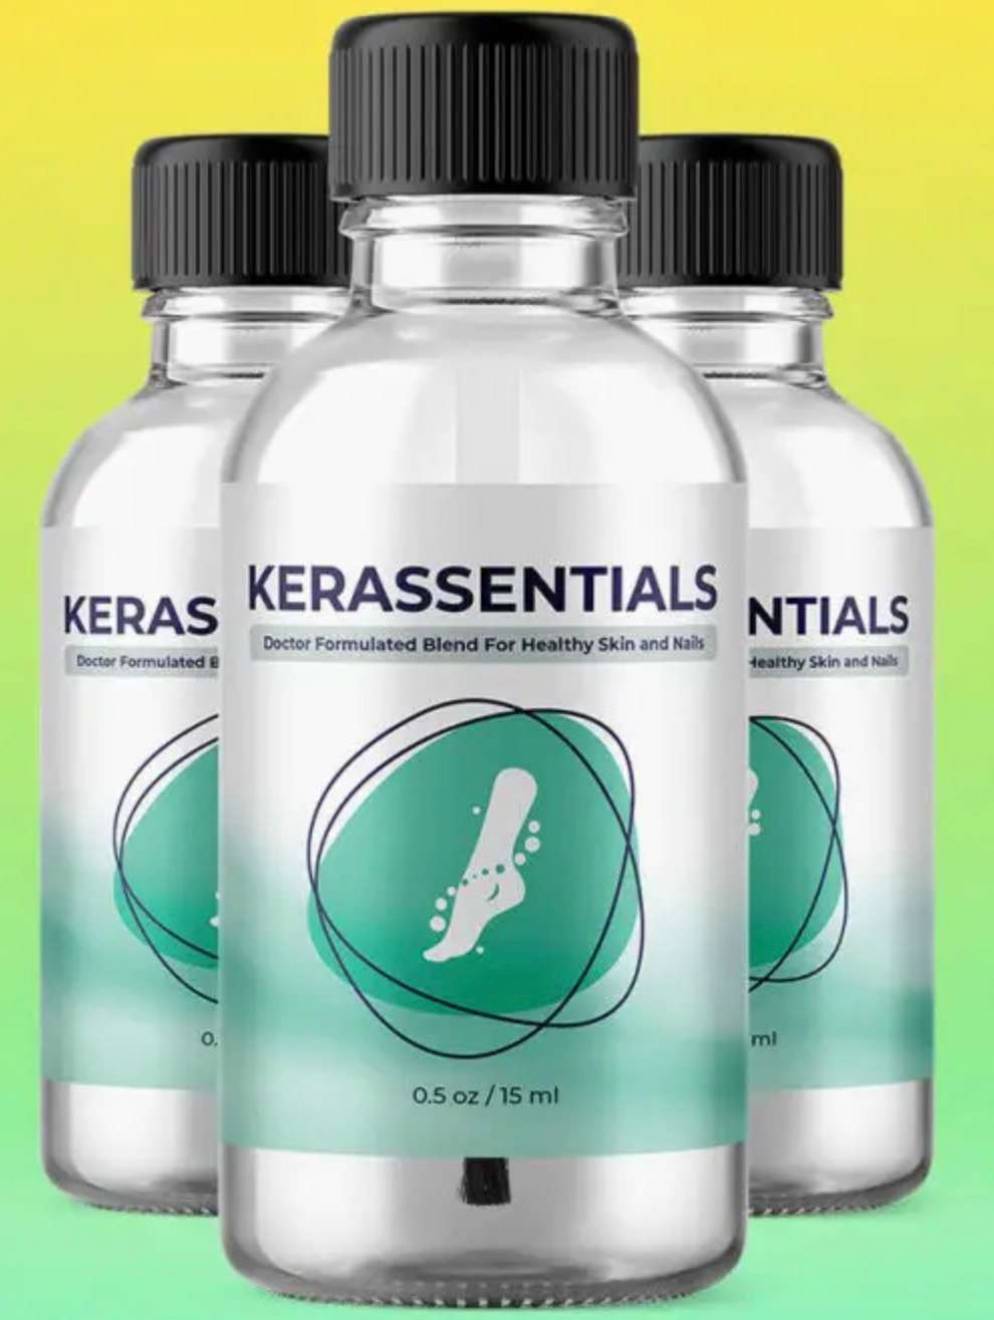 Where To Buy Kerassentials